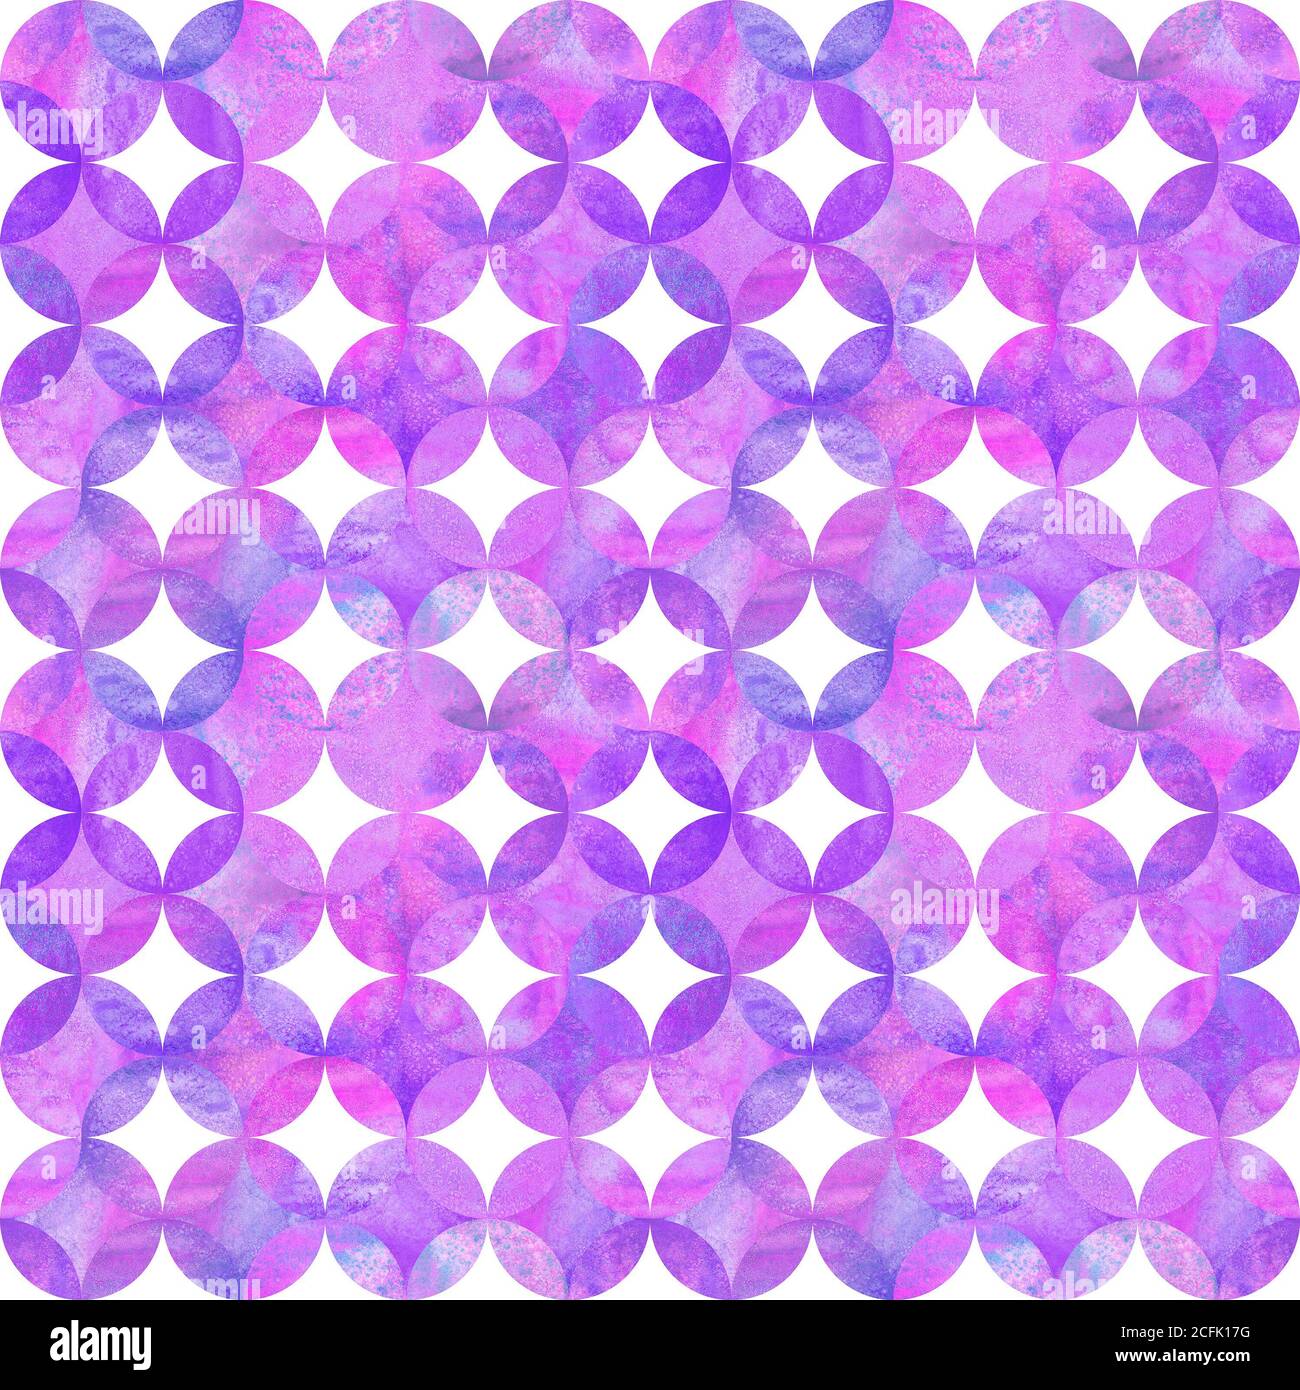 Abstract watercolor background with pink purple overlapping circles on white. Watercolor hand drawn seamless pattern. Watercolour round shaped texture Stock Photo